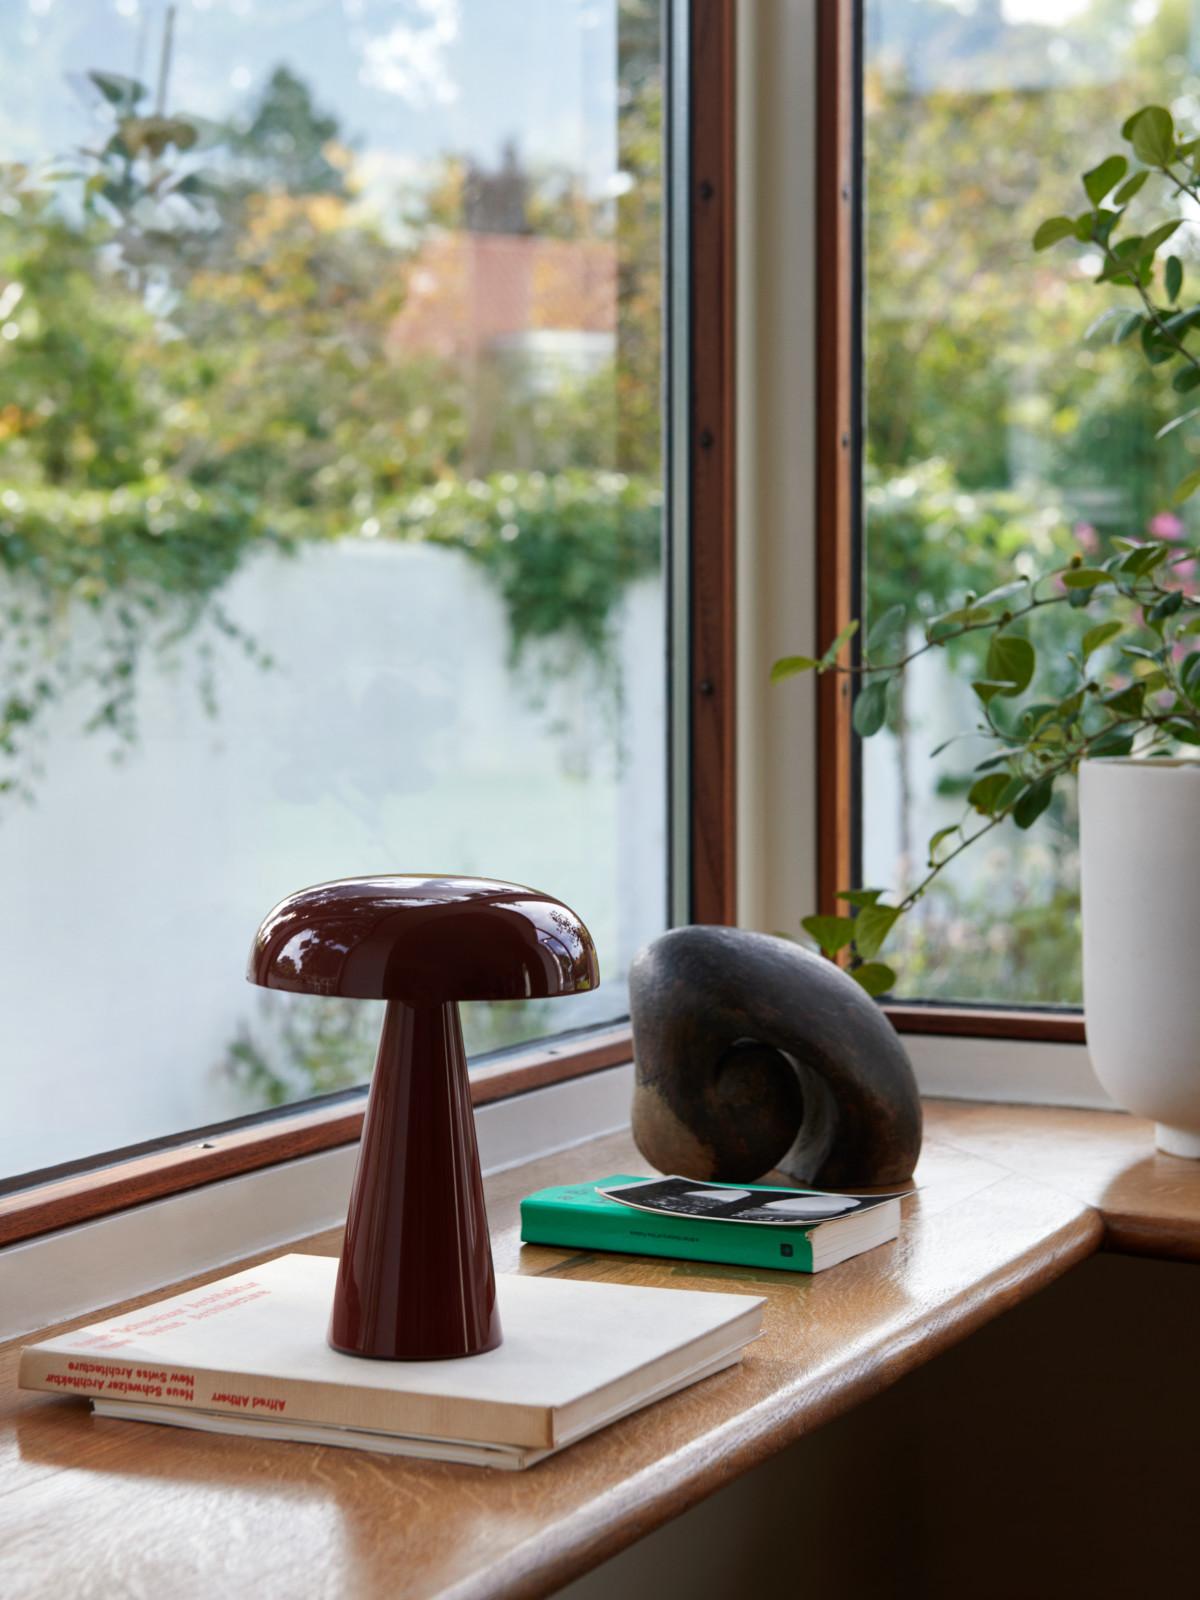 Match lighting to mood with Como SC53, a portable table lamp from Space Copenhagen. 
Crafted from anodized aluminum, Como’s sturdy base tapers up towards a softy curved, mushroom-shaped shade. 
This battery-powered lamp can operate for eleven hours